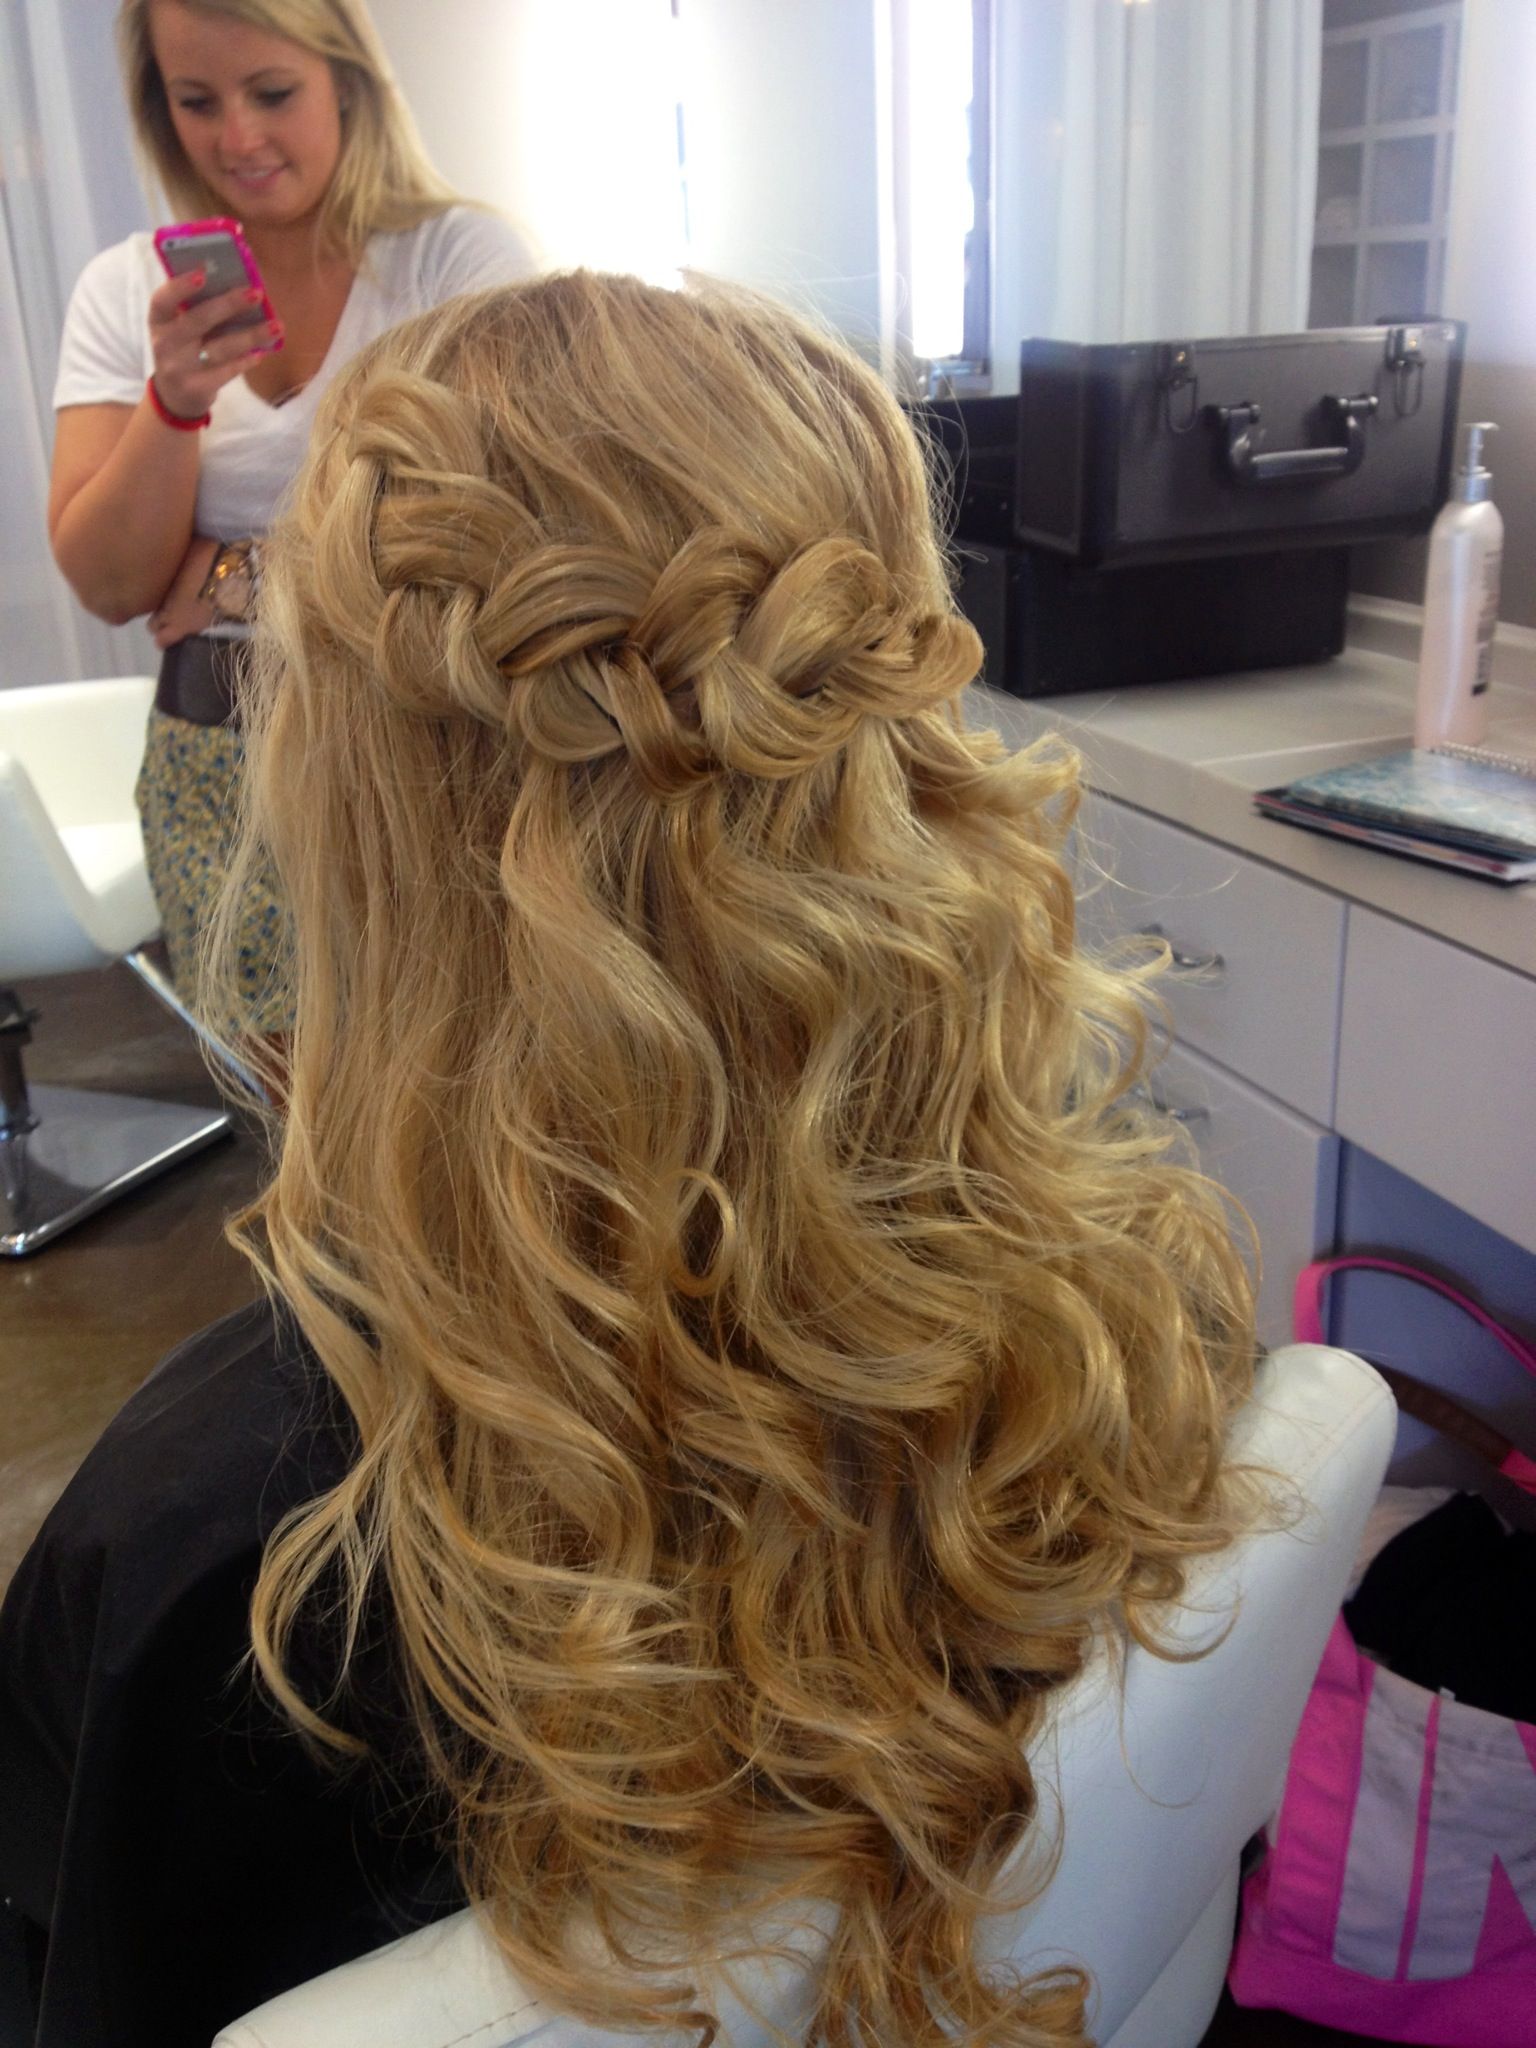 Wavy beach curls and braid | Hair and makeup by Cali | Pinterest ...